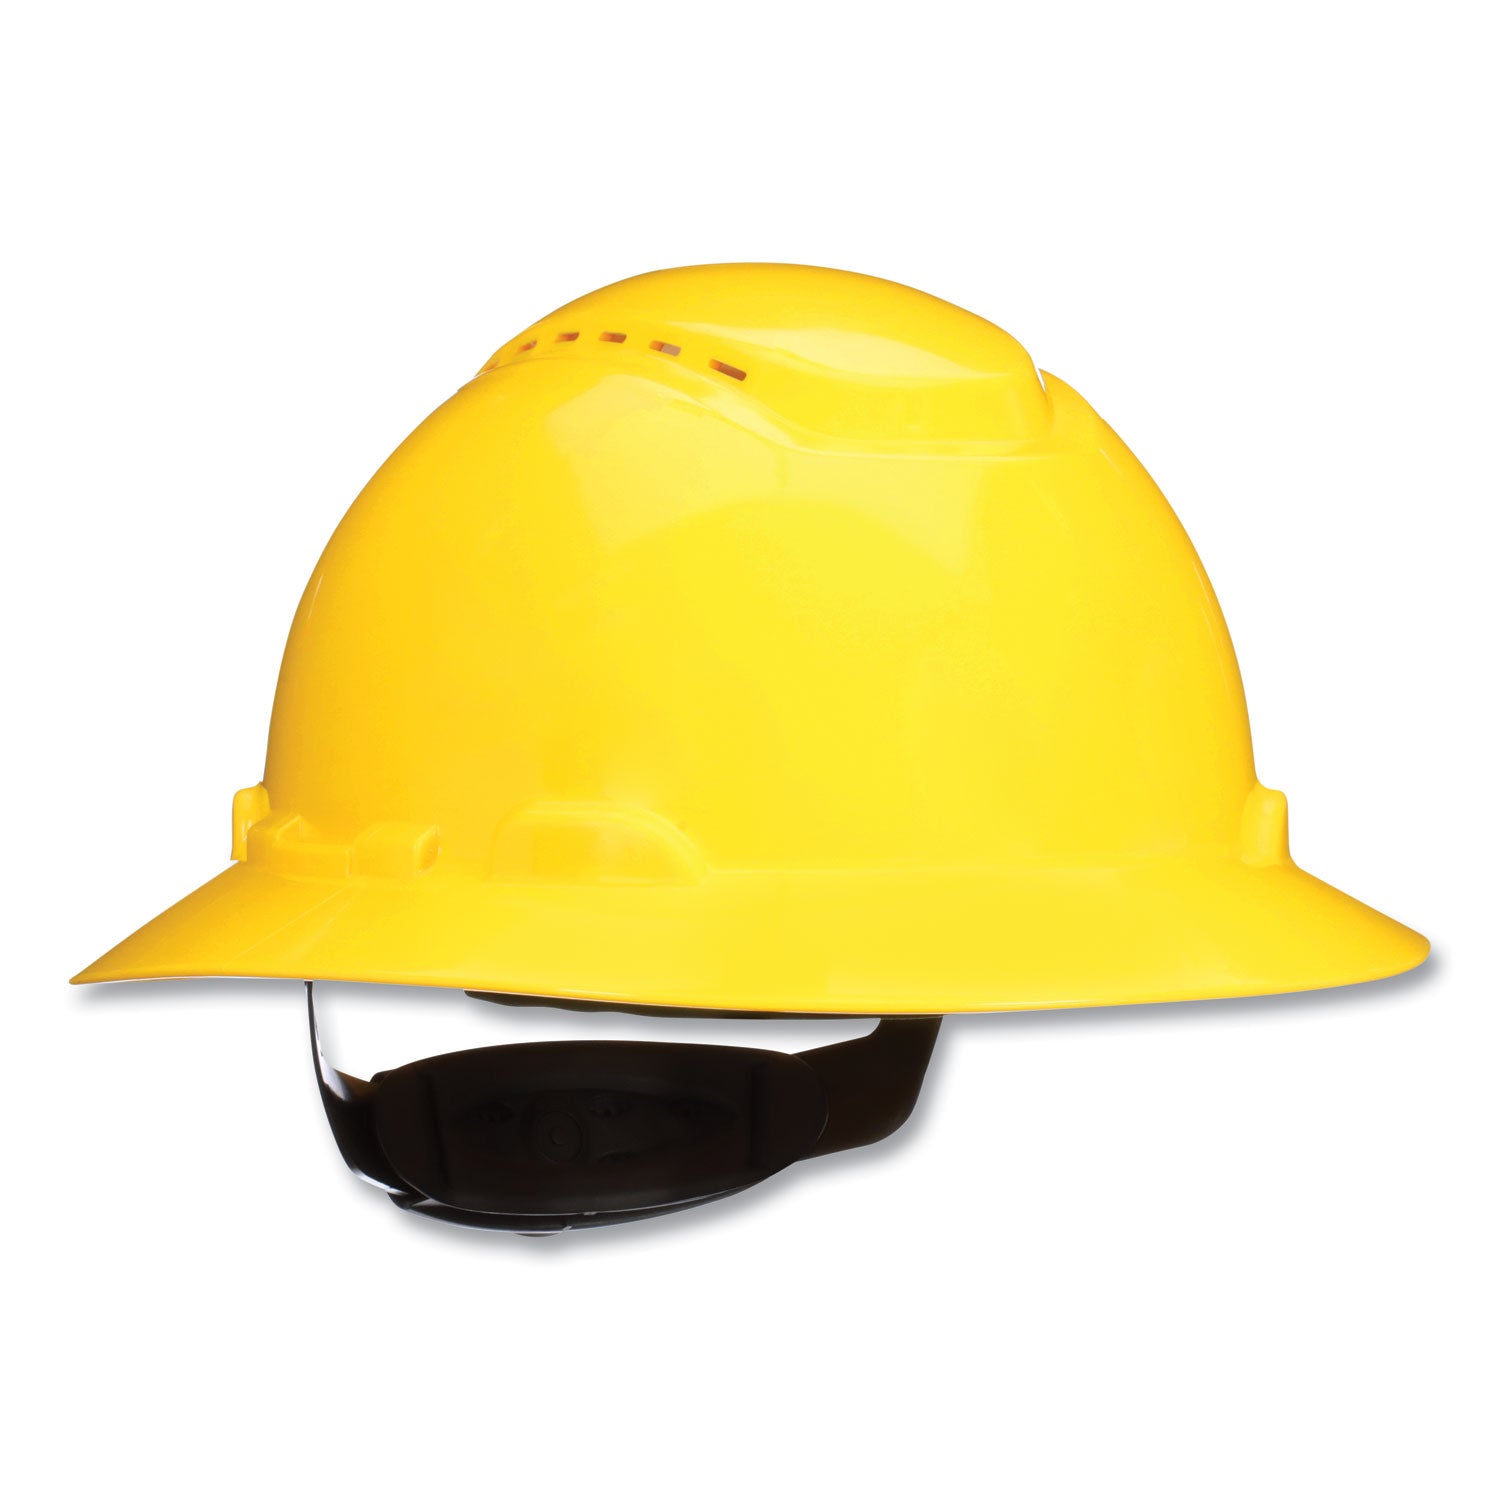 securefit-h-series-hard-hats-h-800-vented-hat-with-uv-indicator-4-point-pressure-diffusion-ratchet-suspension-yellow_mmmh802sfvuv - 1